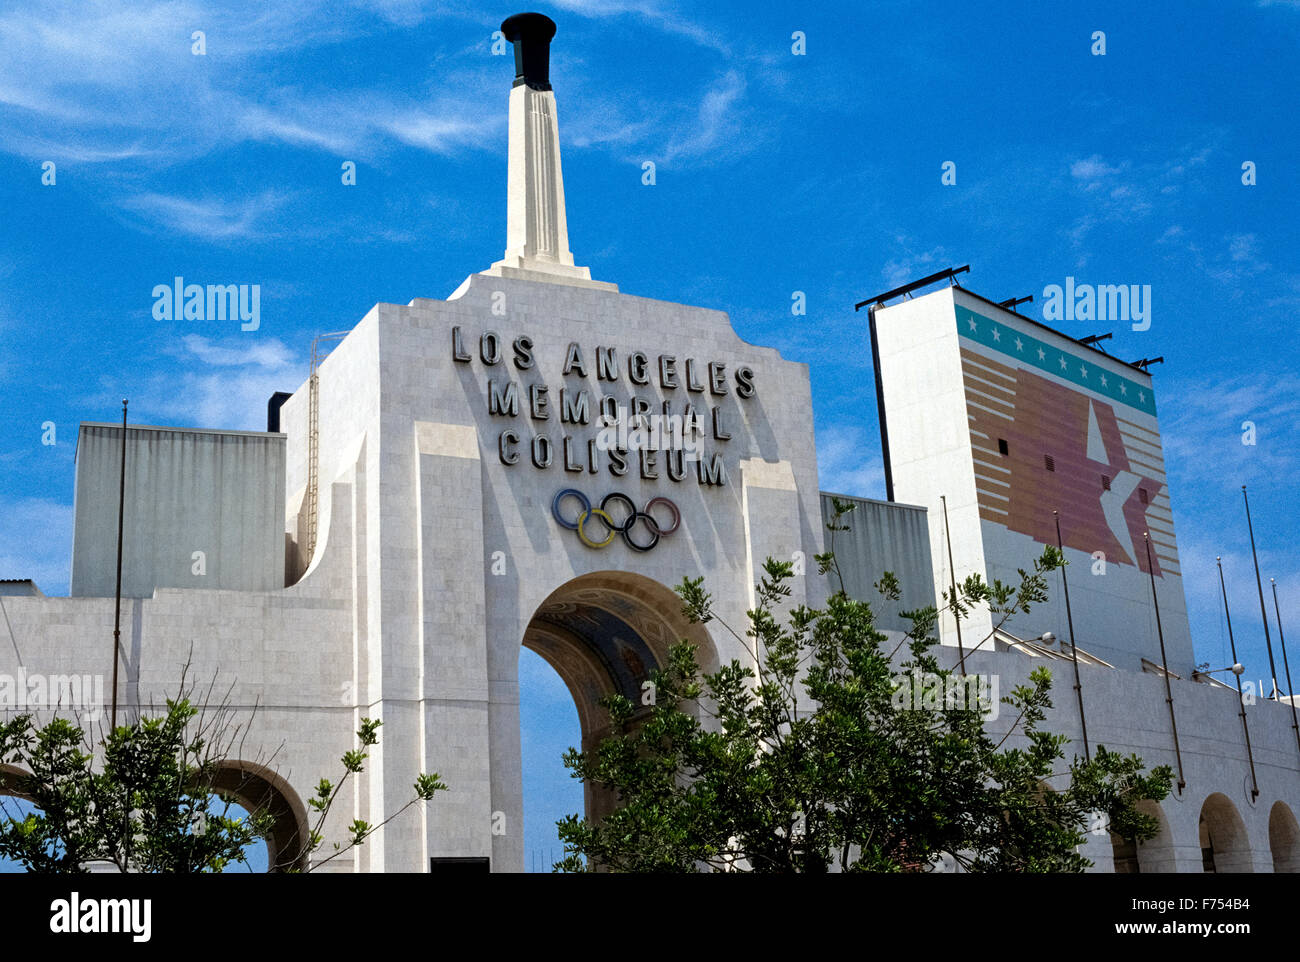 The Los Angeles Memorial Coliseum is a venerable outdoor sports stadium in Southern California, USA, that was host to the Summer Olympic Games in 1932 and 1984. Ever since opening in 1923 it has been the home stadium of the USC Trojans, the football team of the University of Southern California. The impressive main entrance into the LA Coliseum is an archway displaying the Olympic symbol of five interlinked rings and the Olympic torch that is ignited for special events. The stadium can hold more than 93,000 spectators and has been proposed to host the Summer Olympics again in 2024. Stock Photo